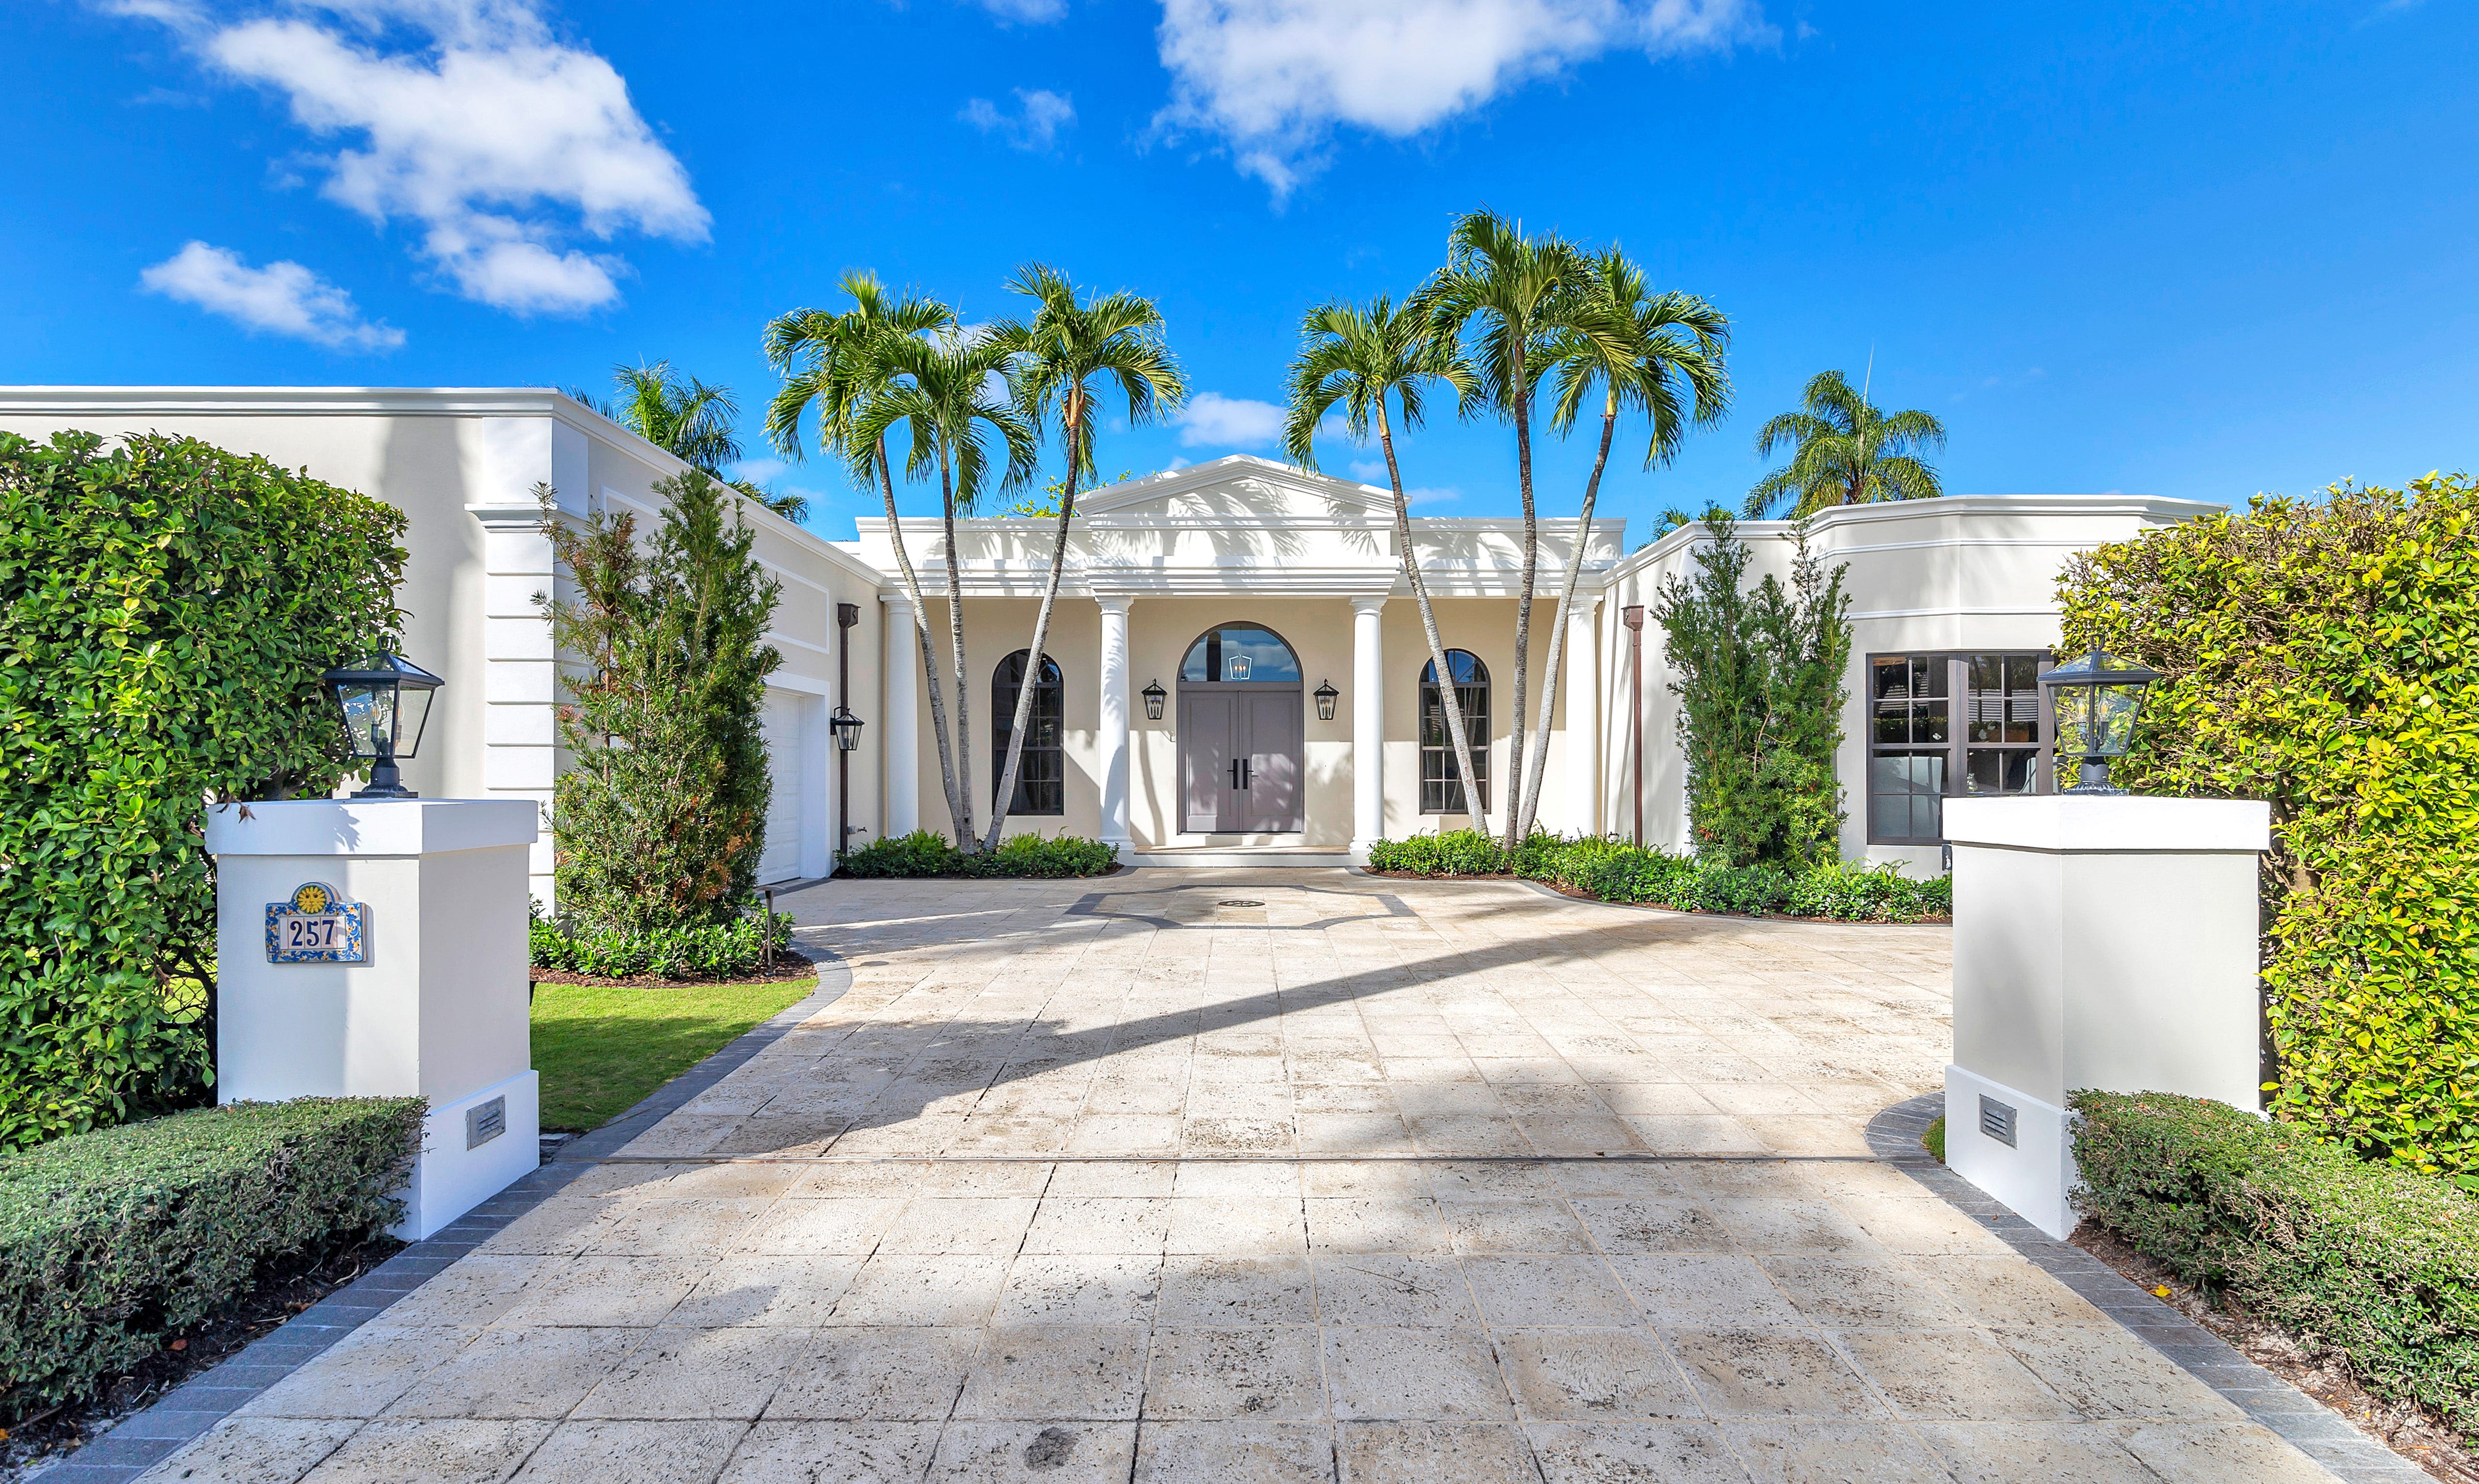 Palm Beach house that sold for $5.6M in late 2020 fetches $12.5M after extensive remodel